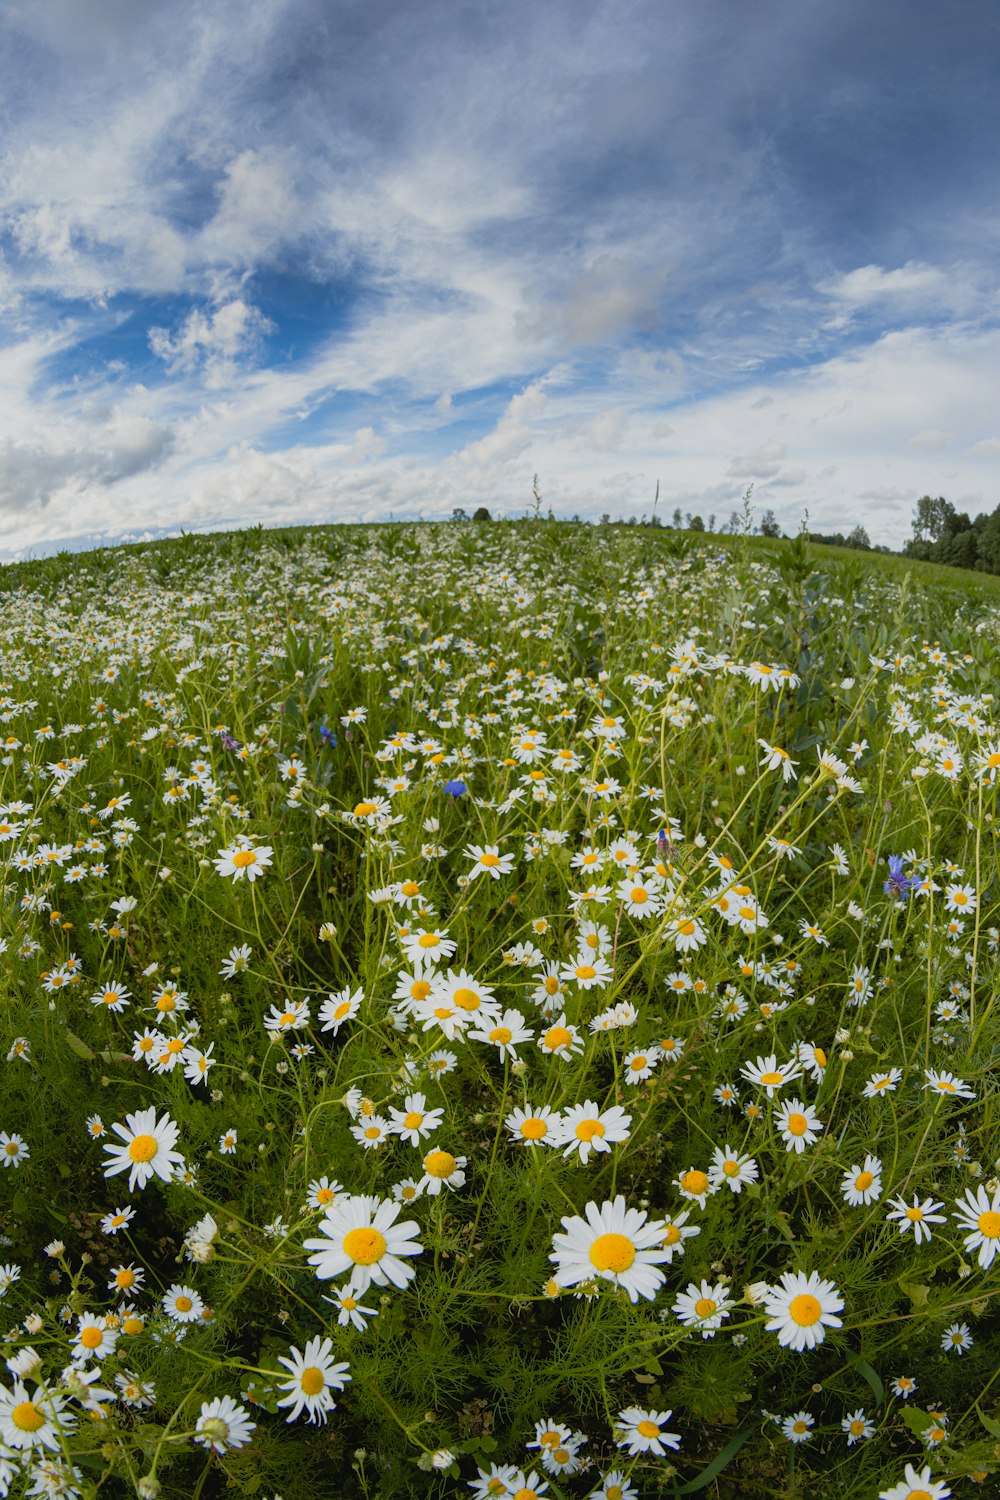 white and yellow flowers on green grass field under blue sky during daytime